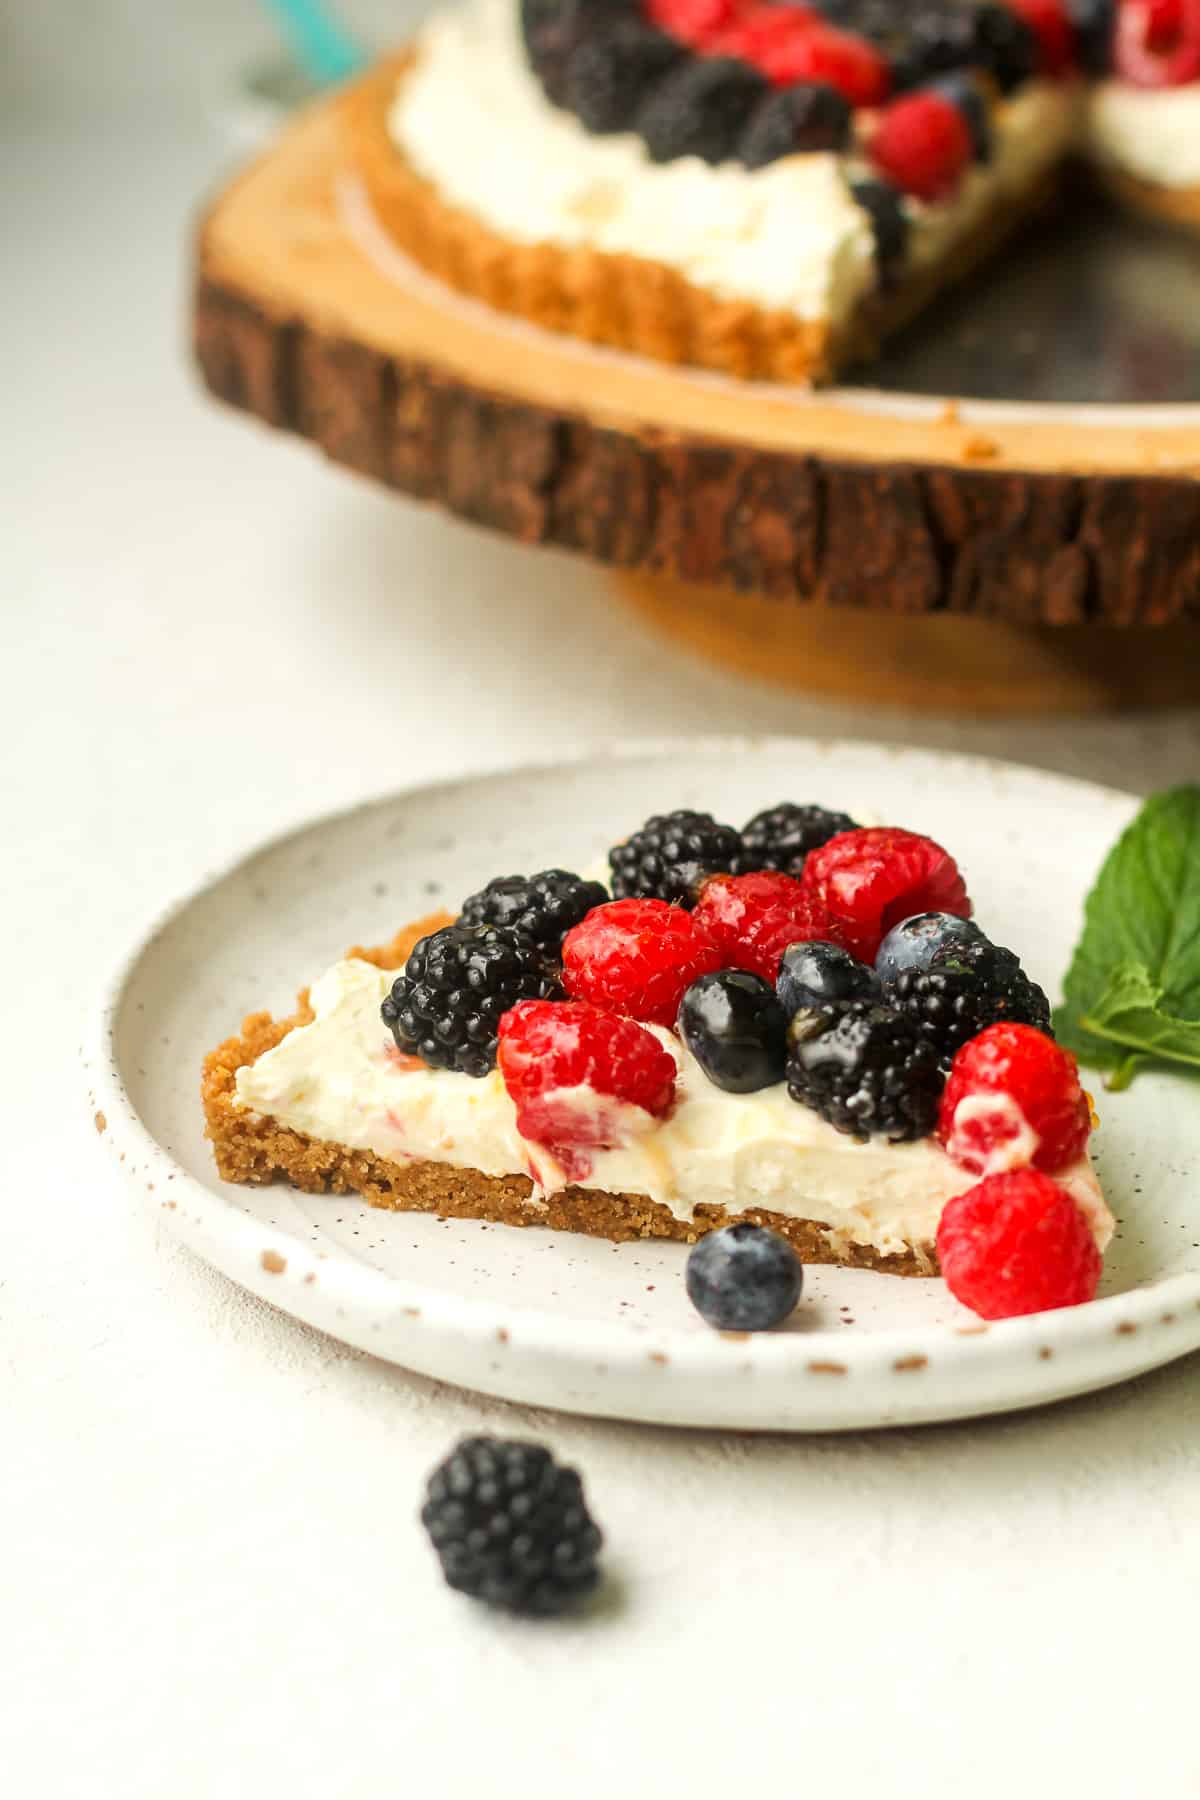 A plate with a slice of berry fruit tart.